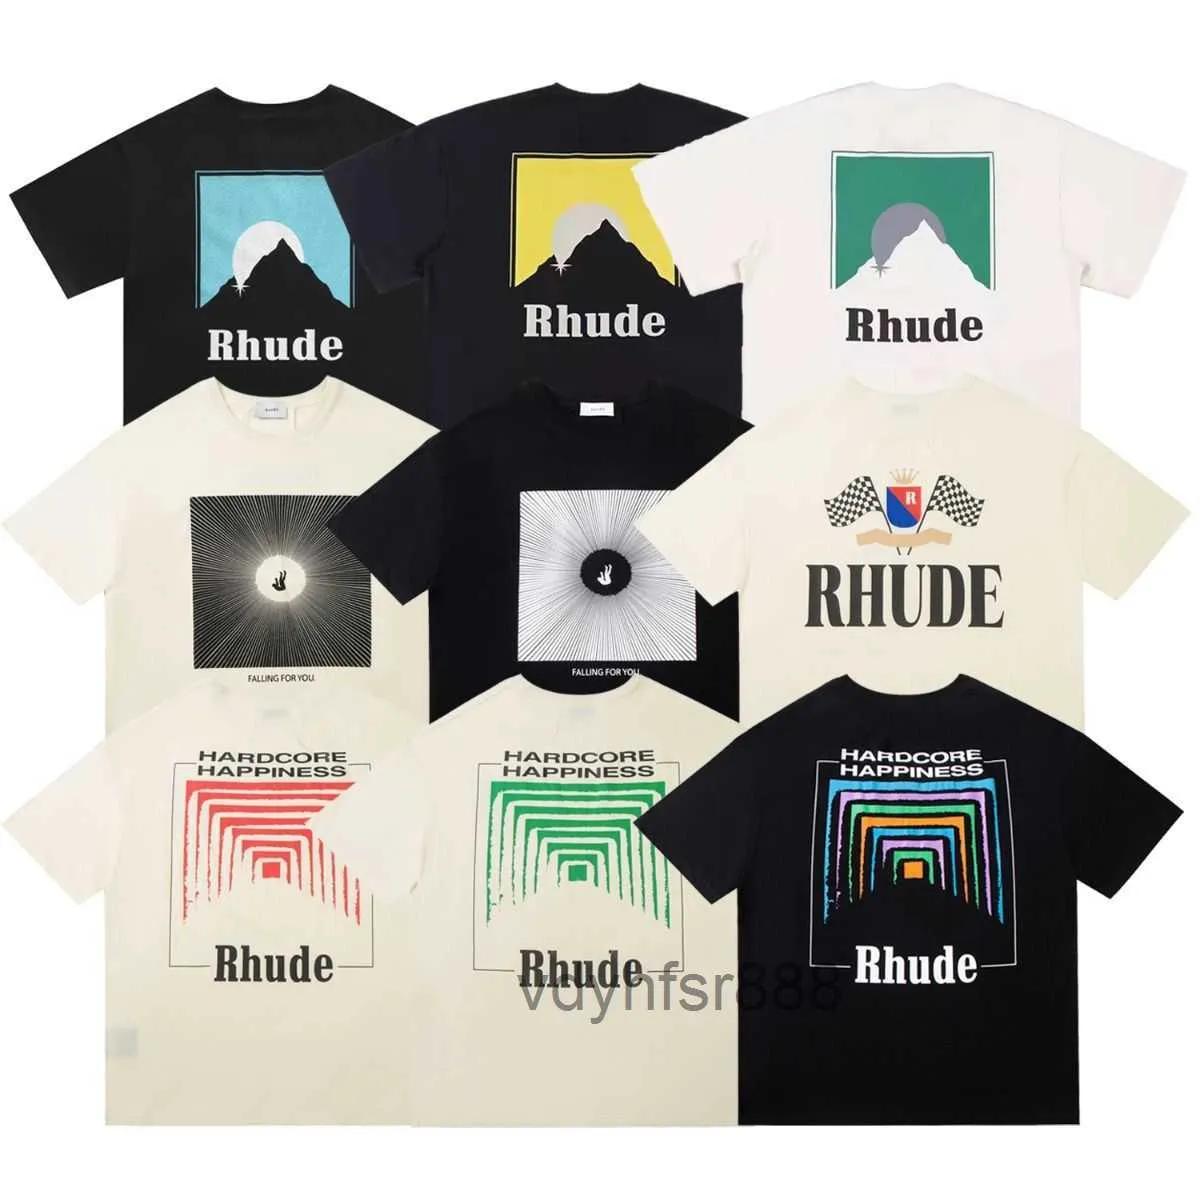 RH-designers Mens Rhude Brodery T Shirts For Summer Letter Polos Shirt Womens Tshirts Clothing Short Sleeved Large Plus Size 100% Cotton Tees S-XL NB1D